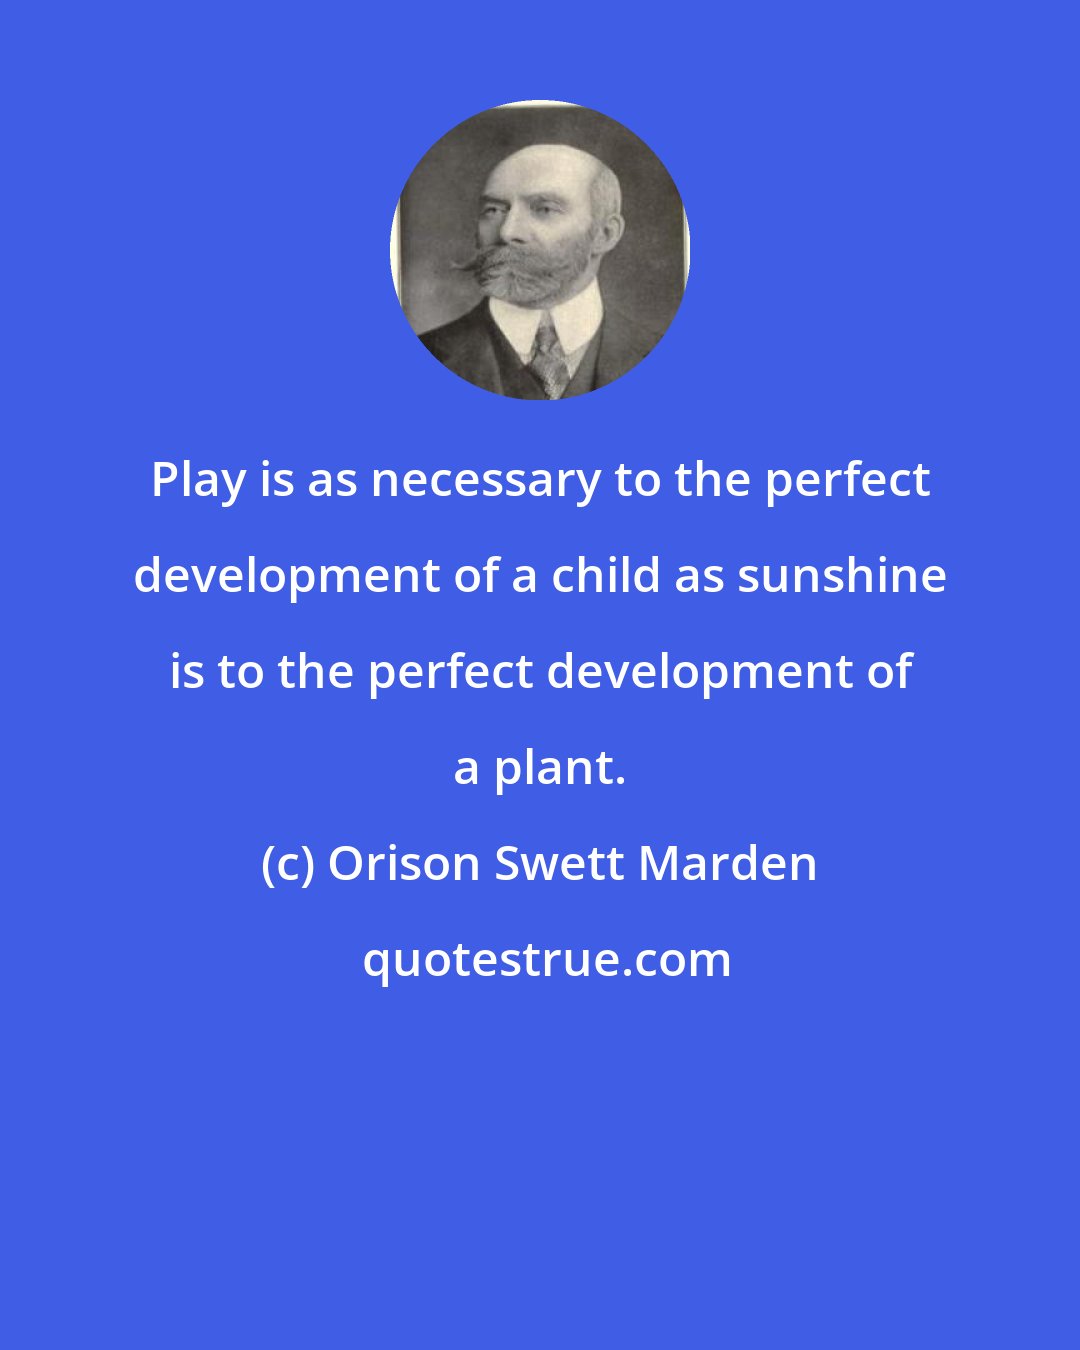 Orison Swett Marden: Play is as necessary to the perfect development of a child as sunshine is to the perfect development of a plant.